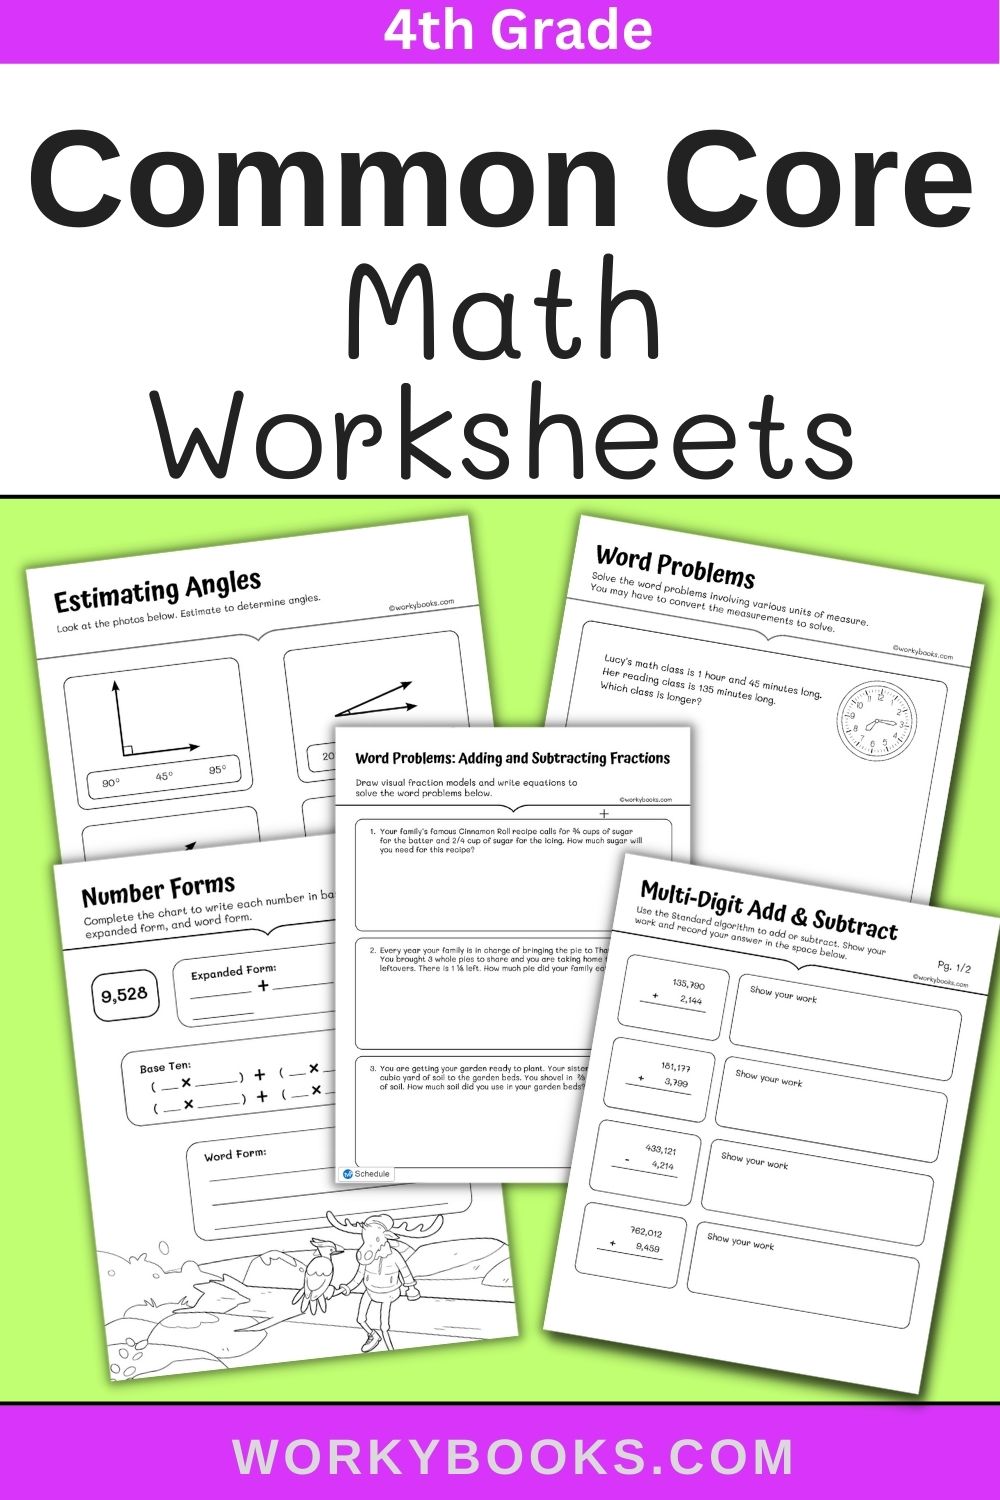 4th grade common core math worksheets